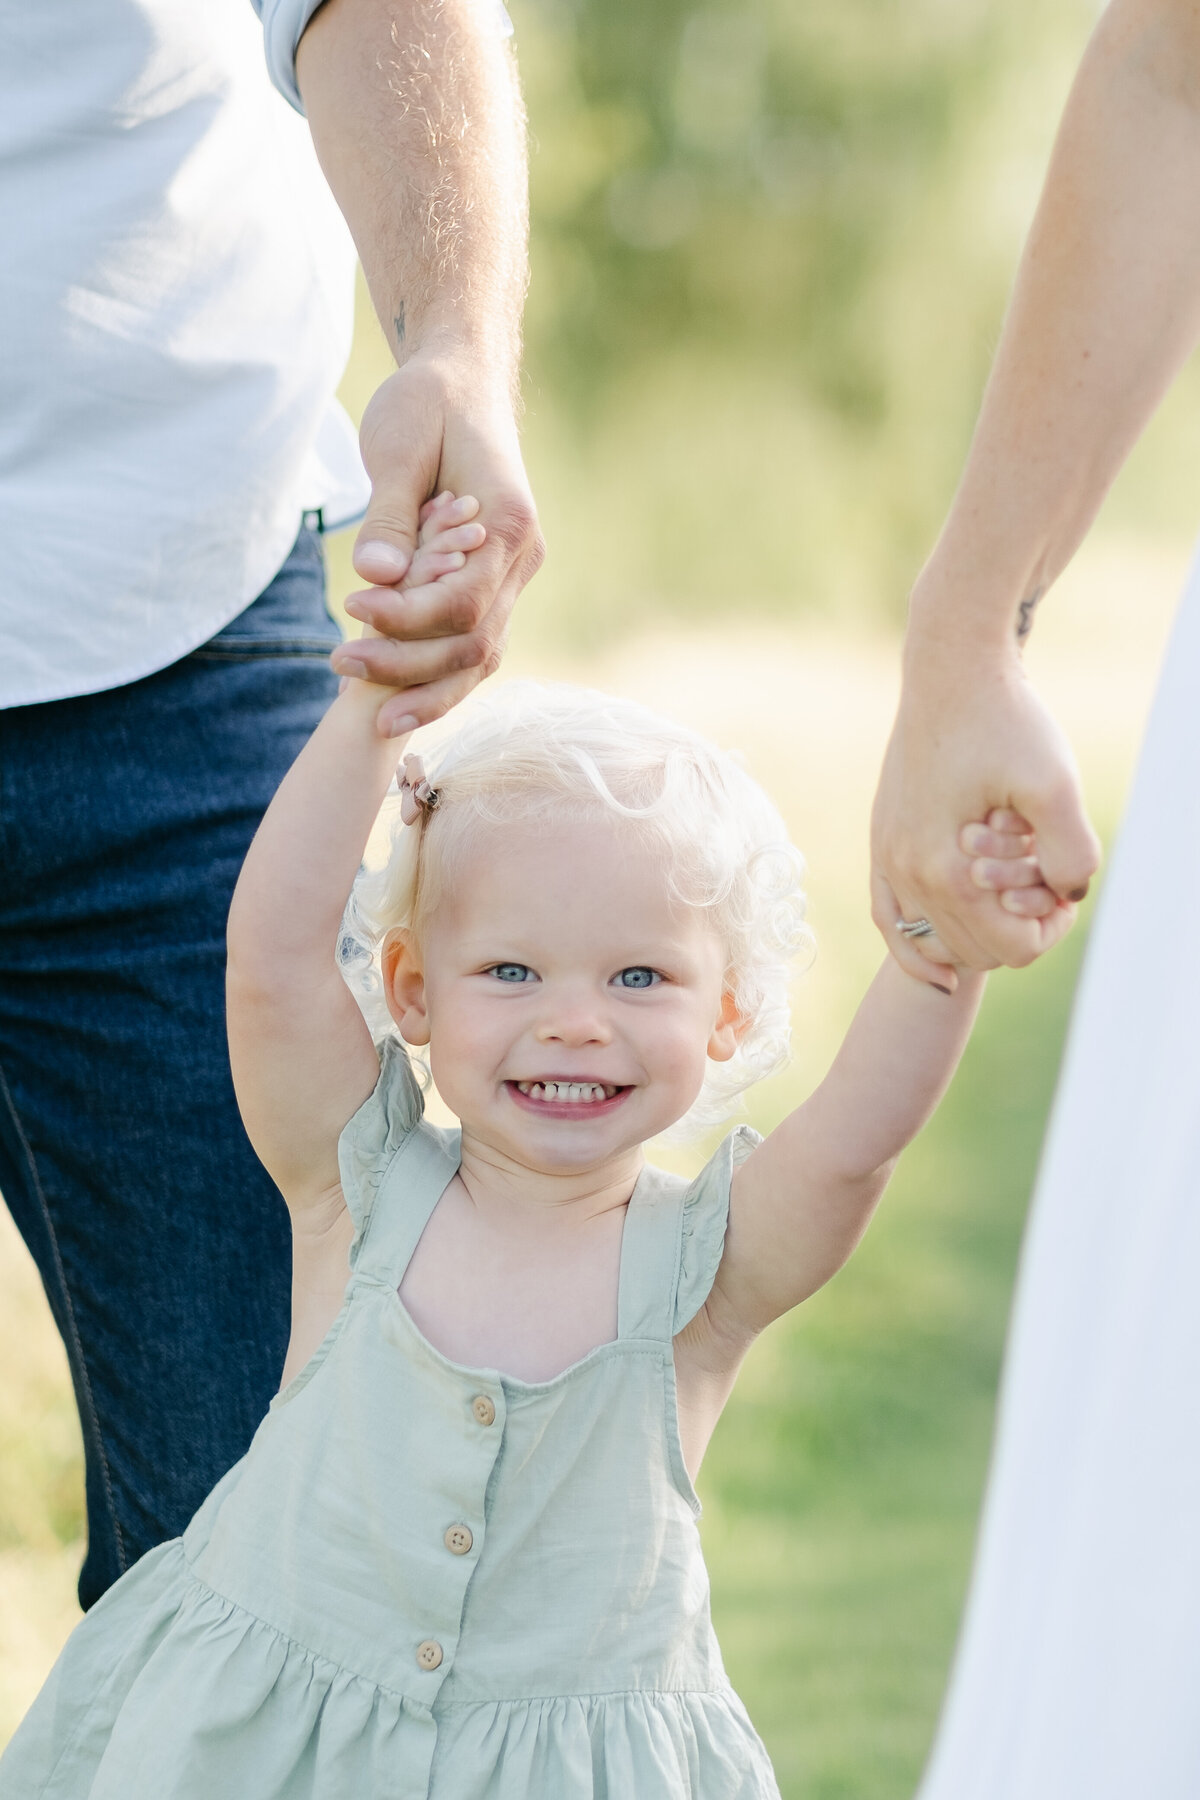 Little girl smiles at the camera while her parents hold her hands